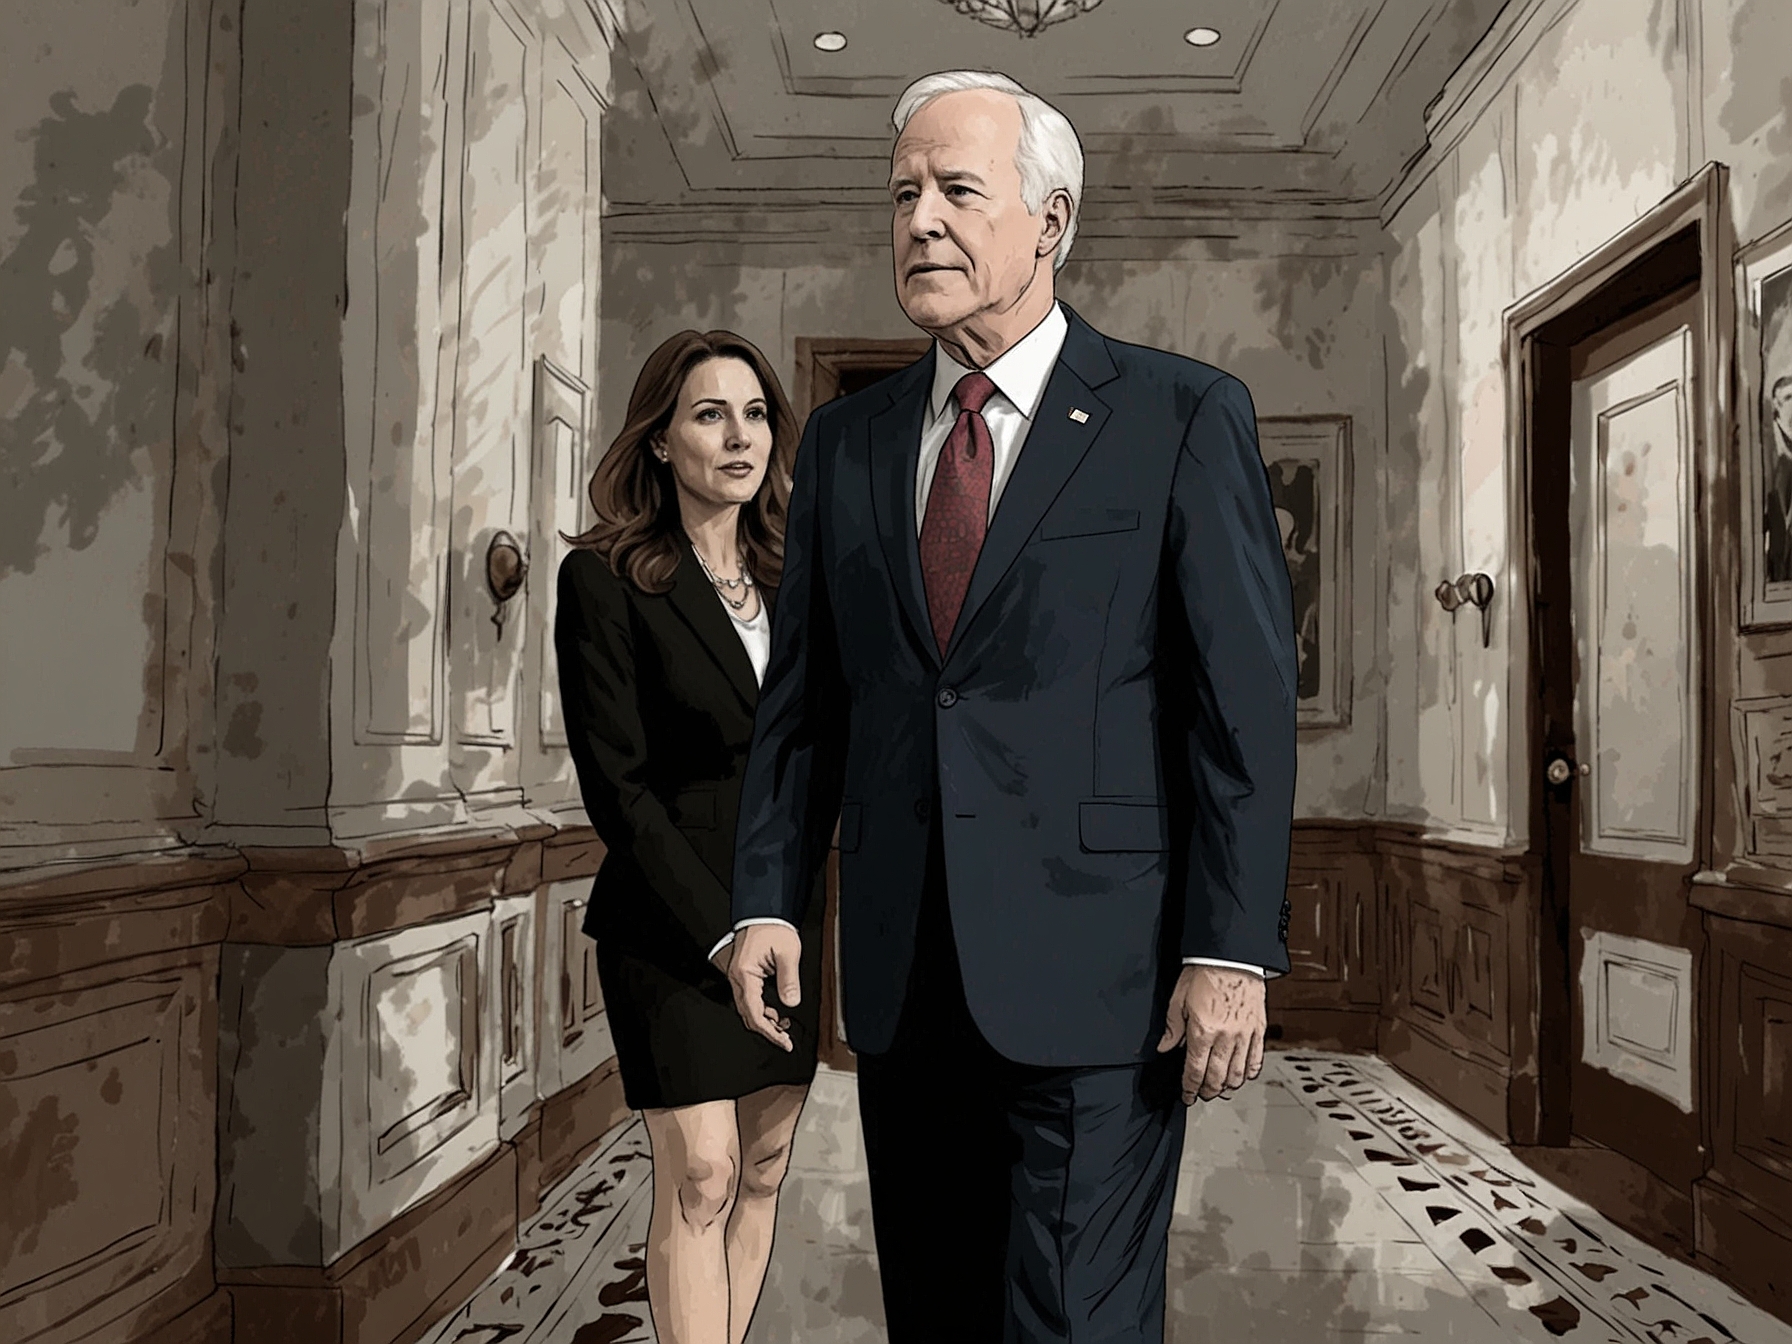 Sen. John Cornyn discussing tax reform plans with a reporter in the halls of Capitol Hill.